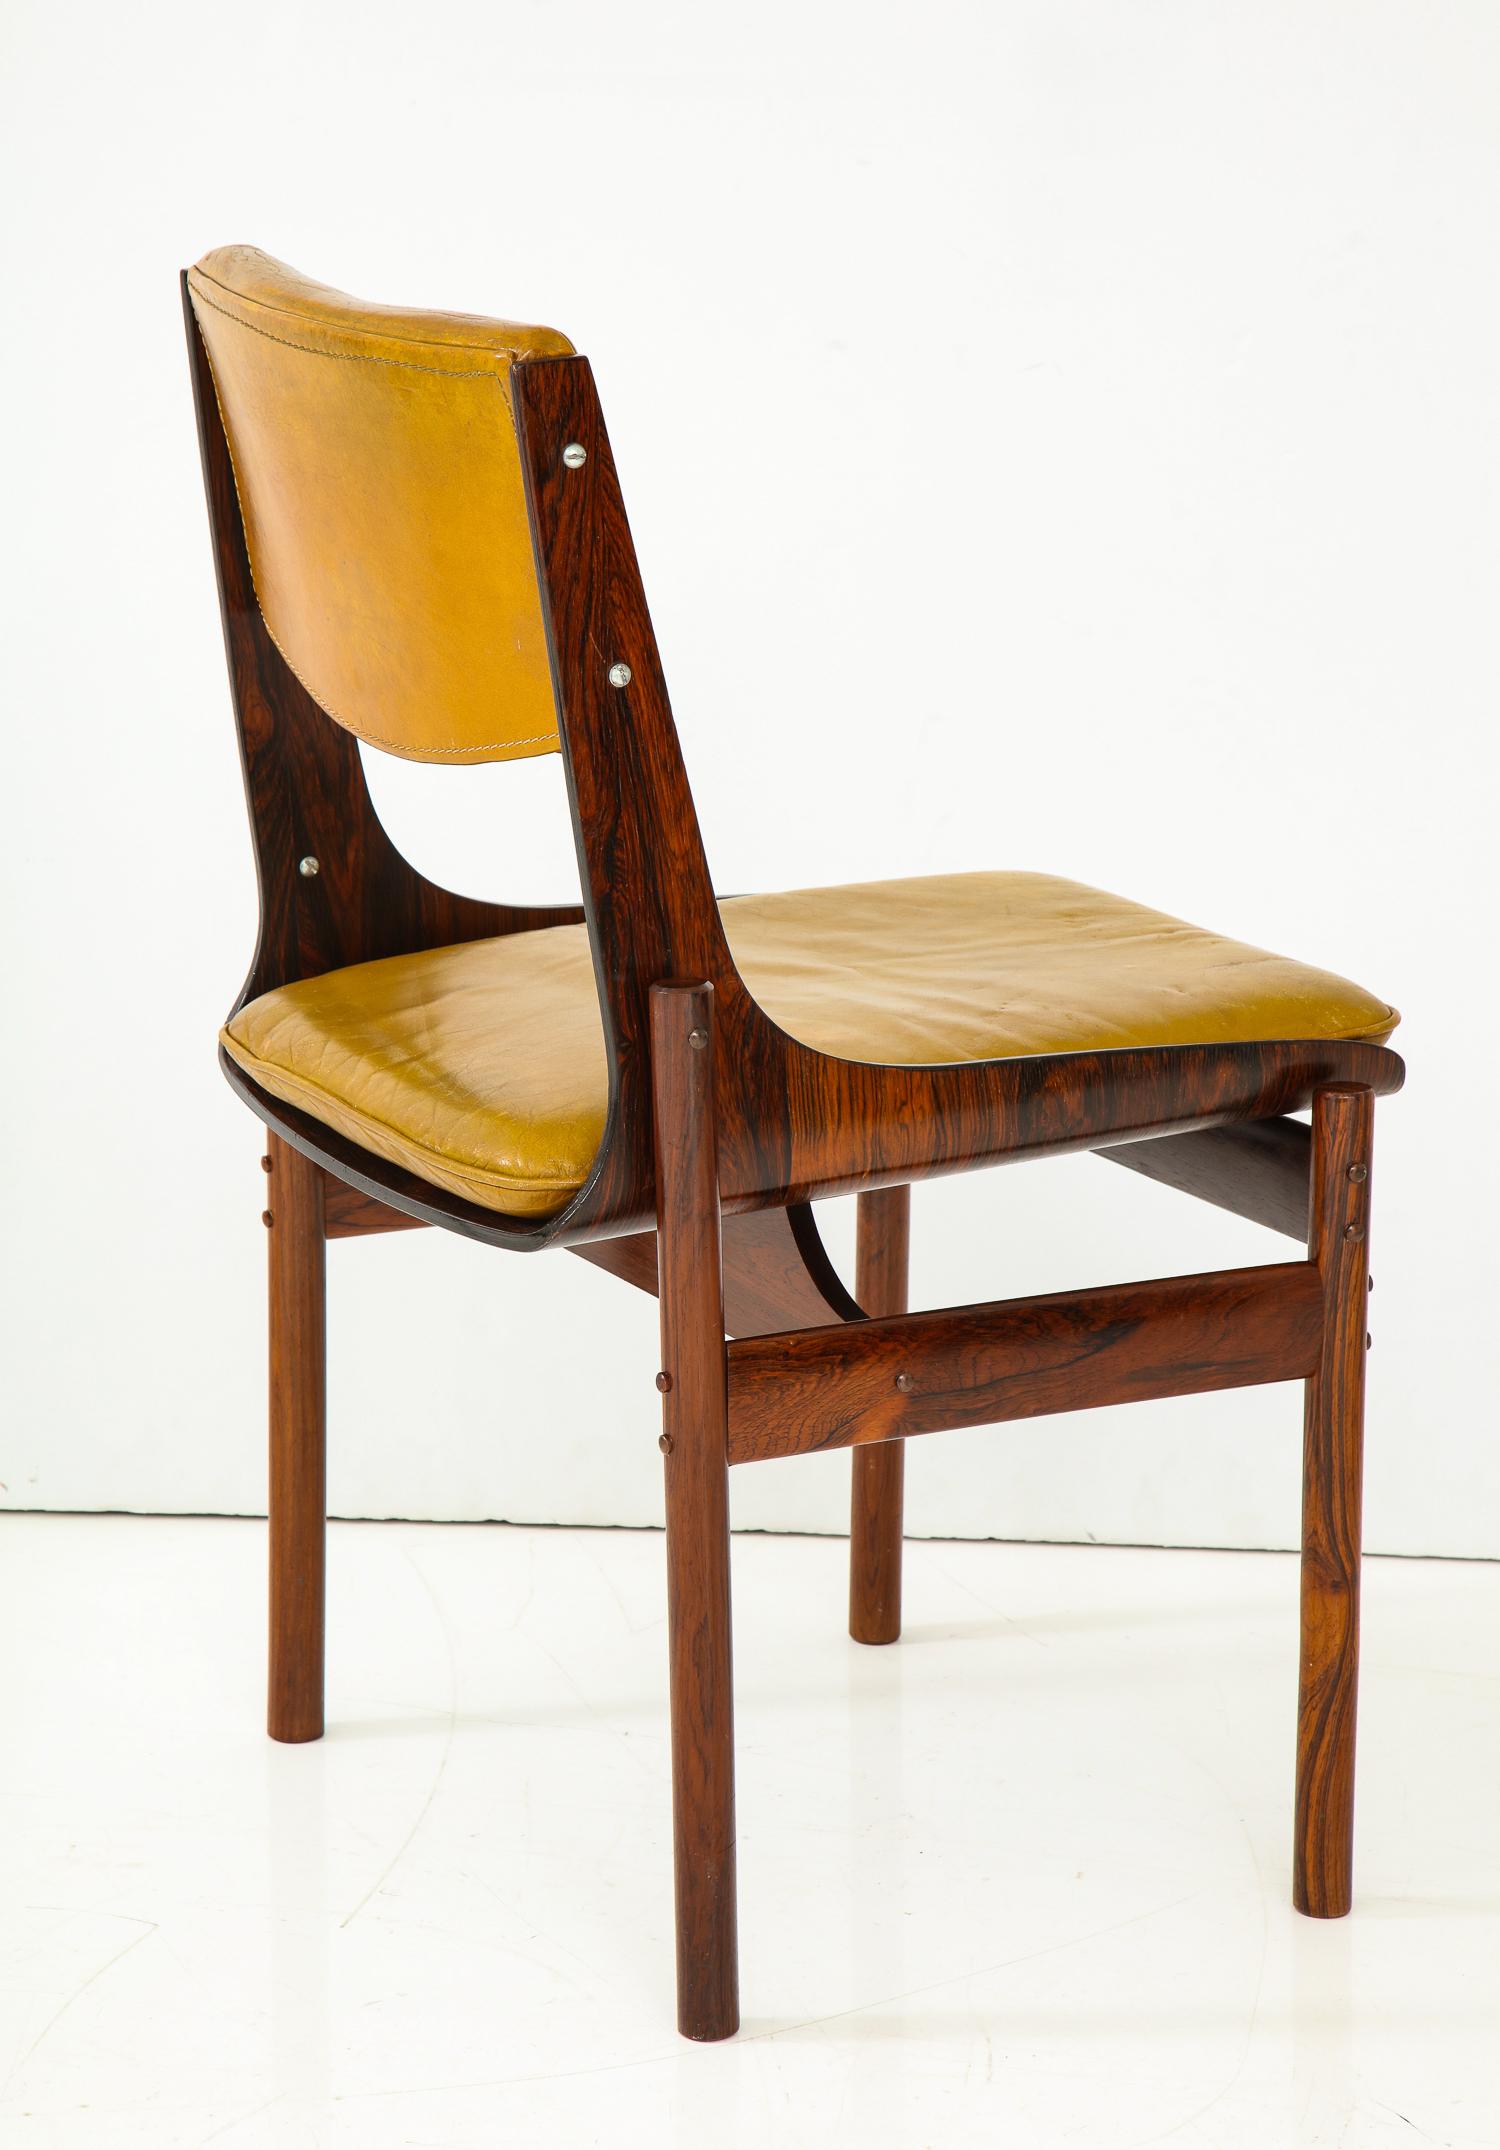 Seat of Four Jacaranda and Leather Chairs from Brazil 1